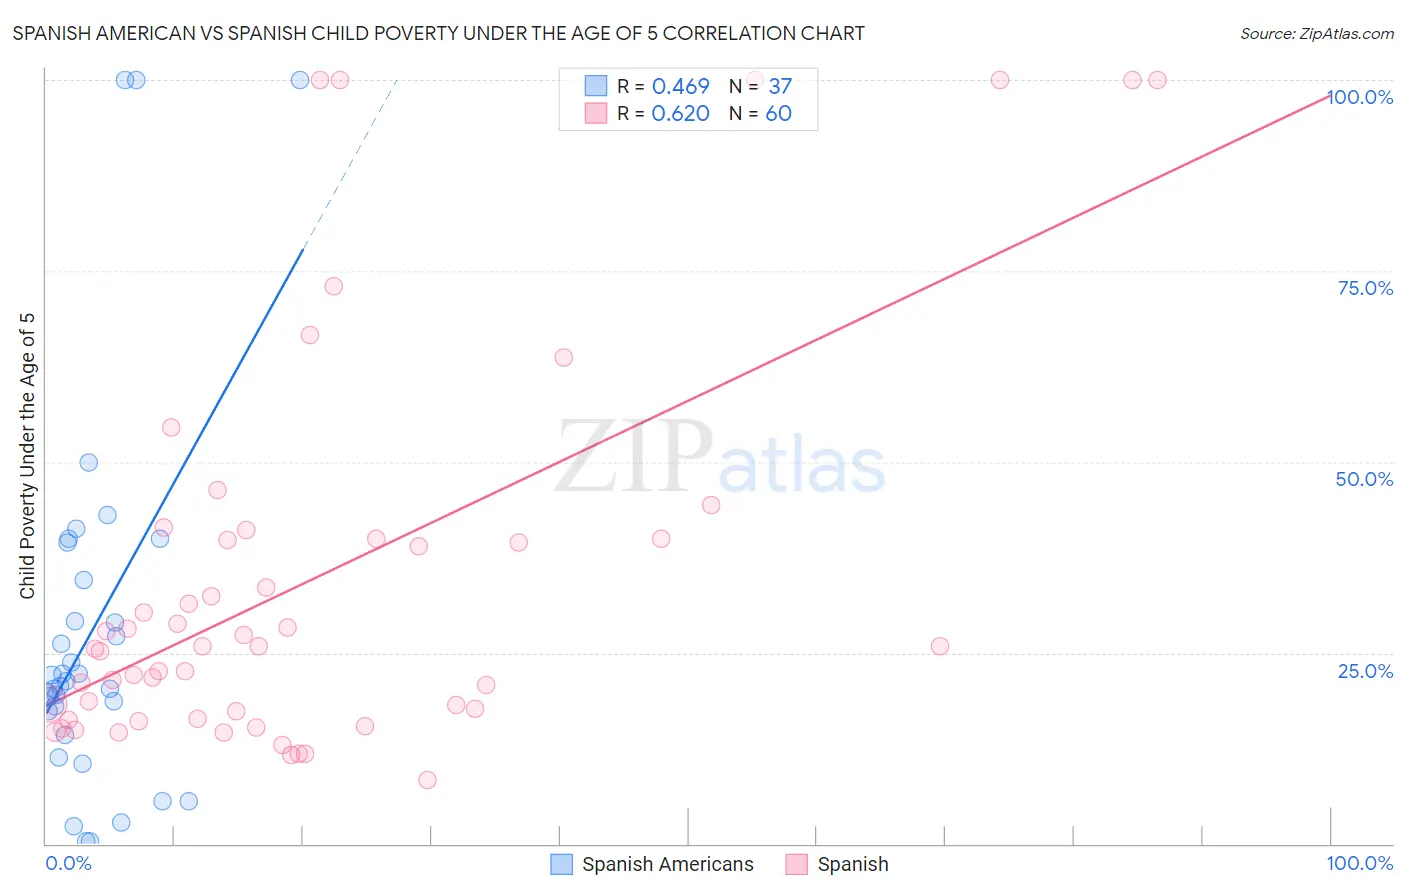 Spanish American vs Spanish Child Poverty Under the Age of 5